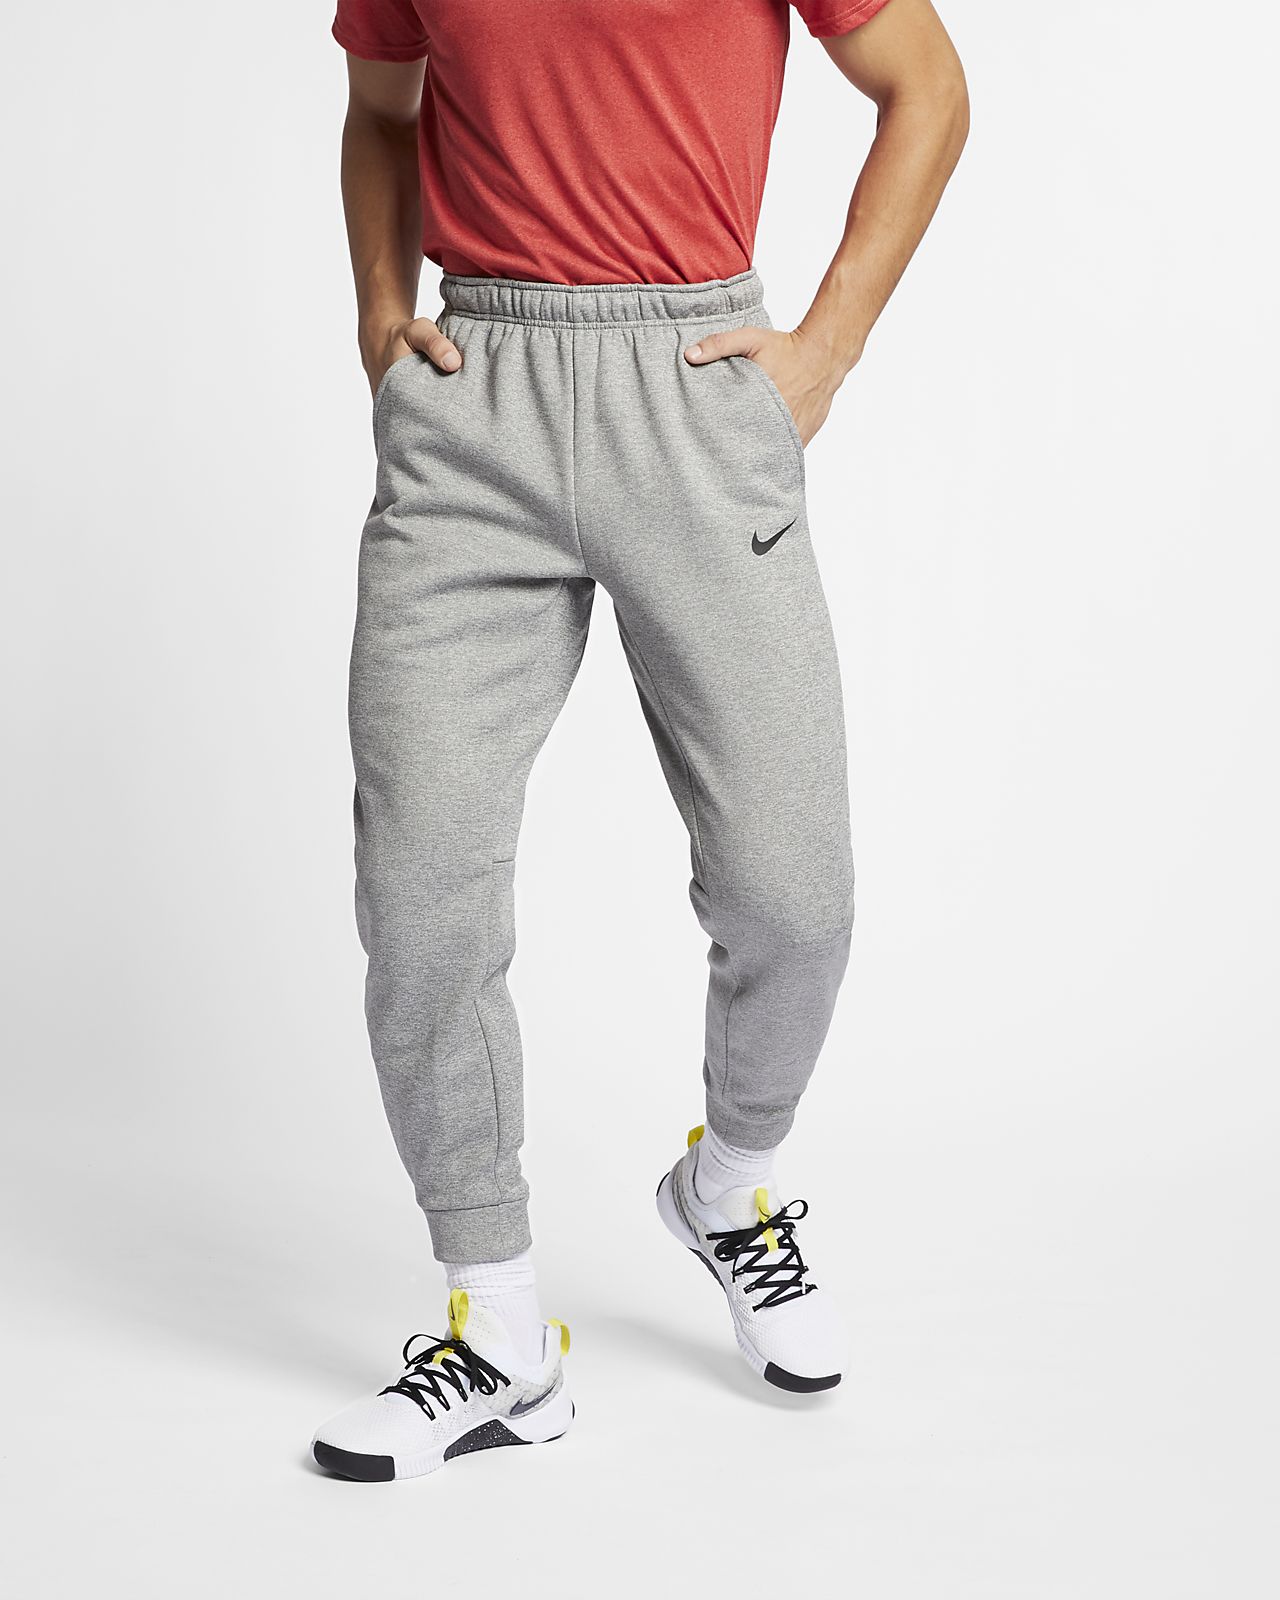 nike large tall sweatpants Online Shopping mall | Find the best prices ...